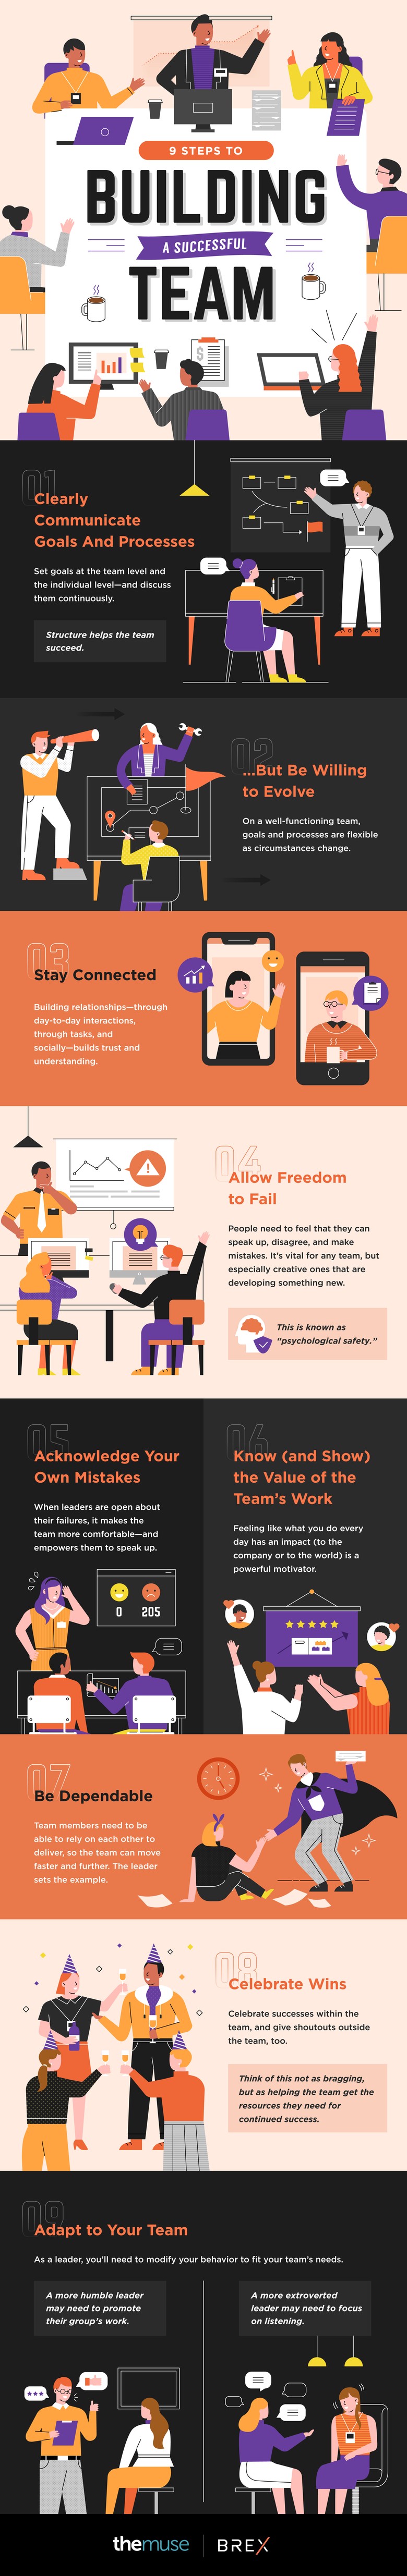 infographic illustrating tips for building and leading a team, full text above